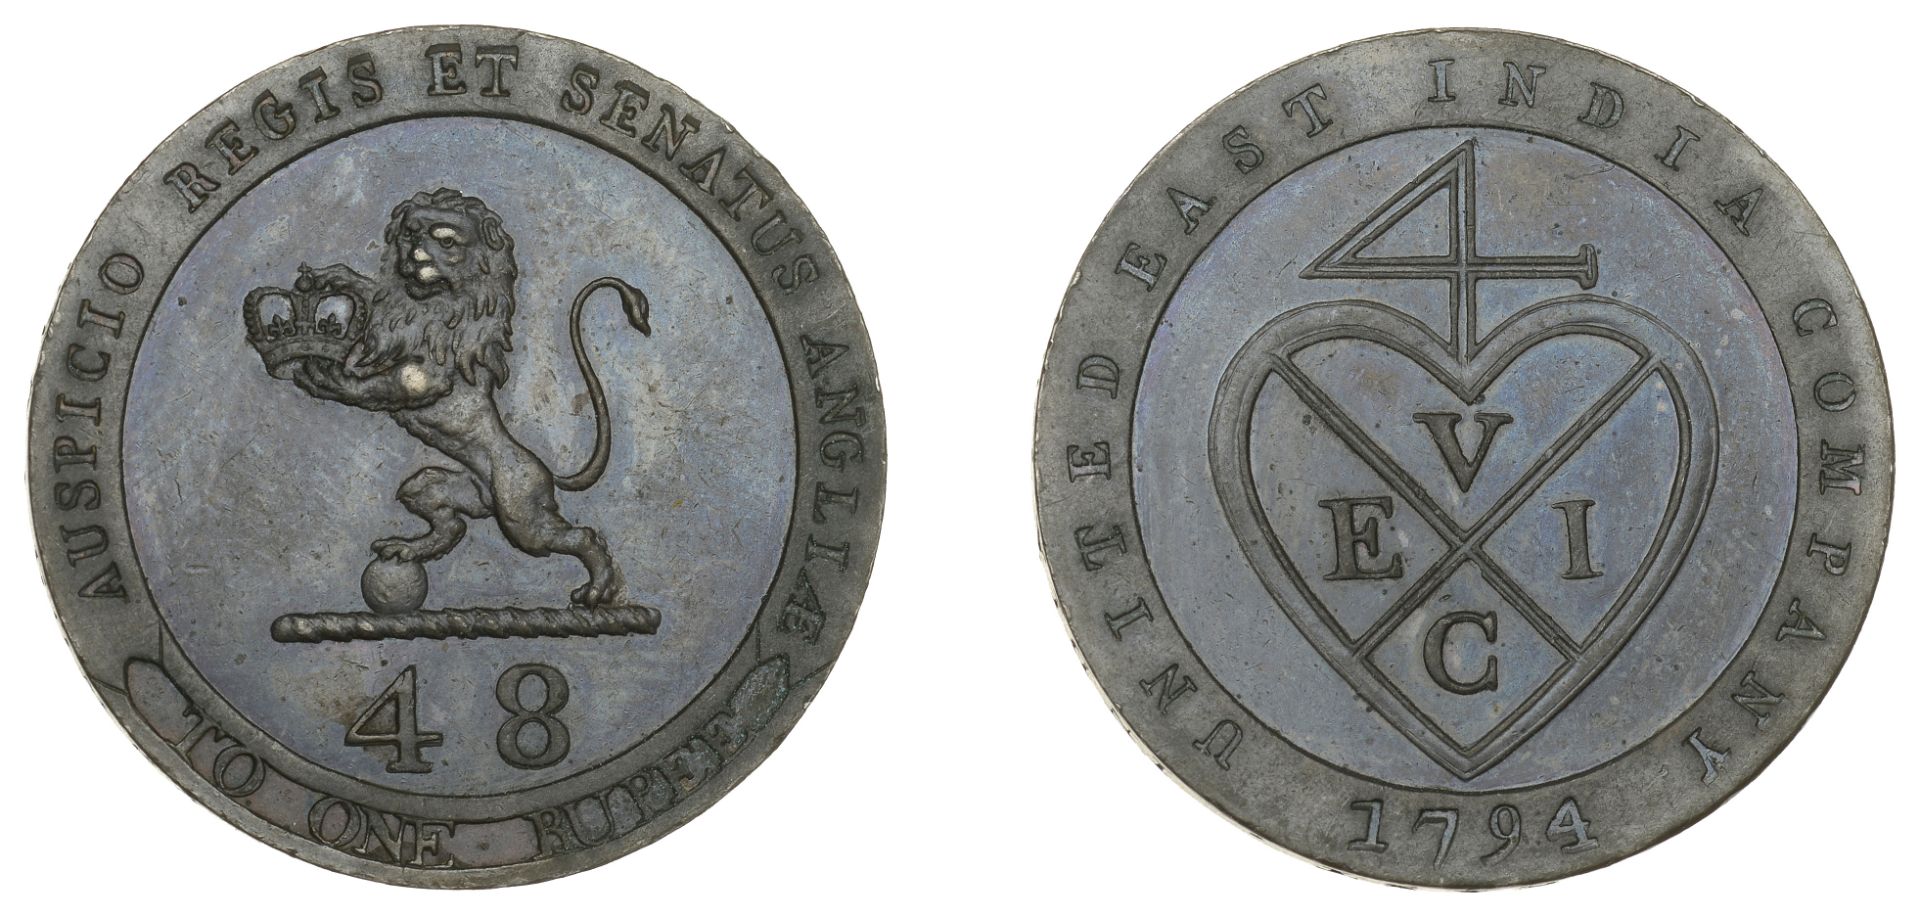 East India Company, Madras Presidency, Northern Circars: European style coinages, Soho, bron...